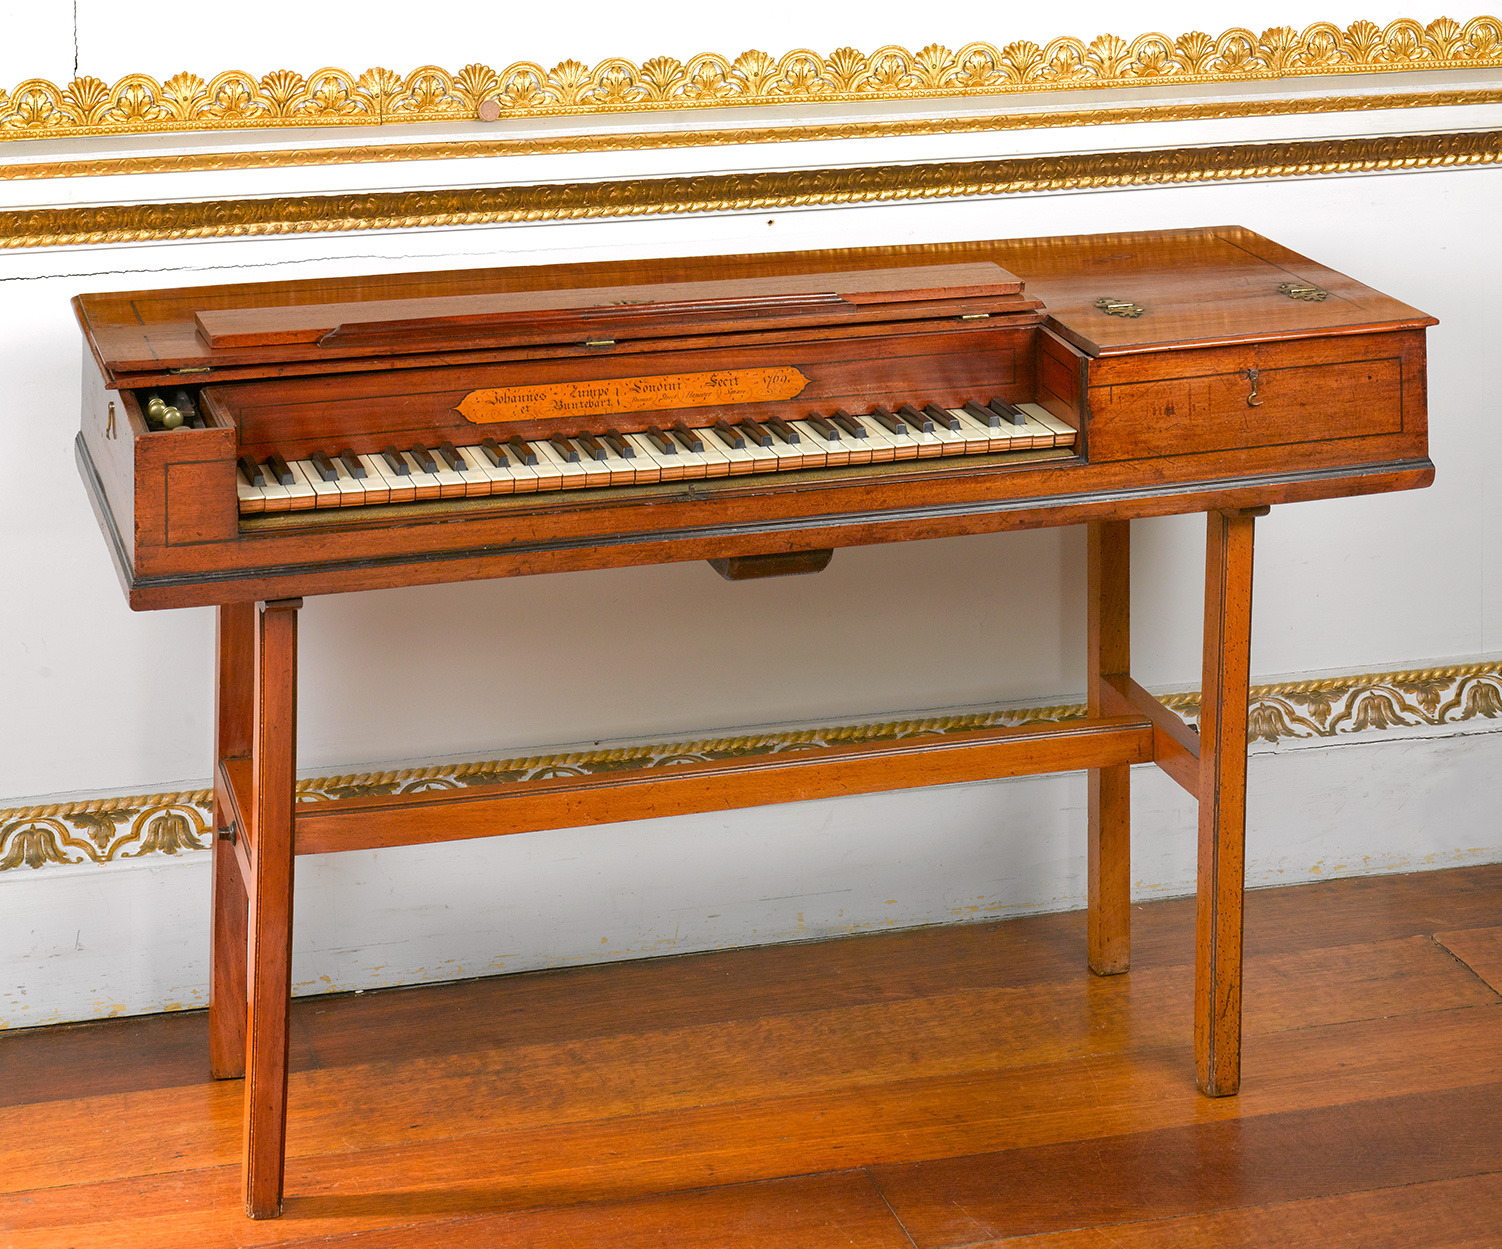 ENGLISH PIANO - THE COBBE COLLECTION